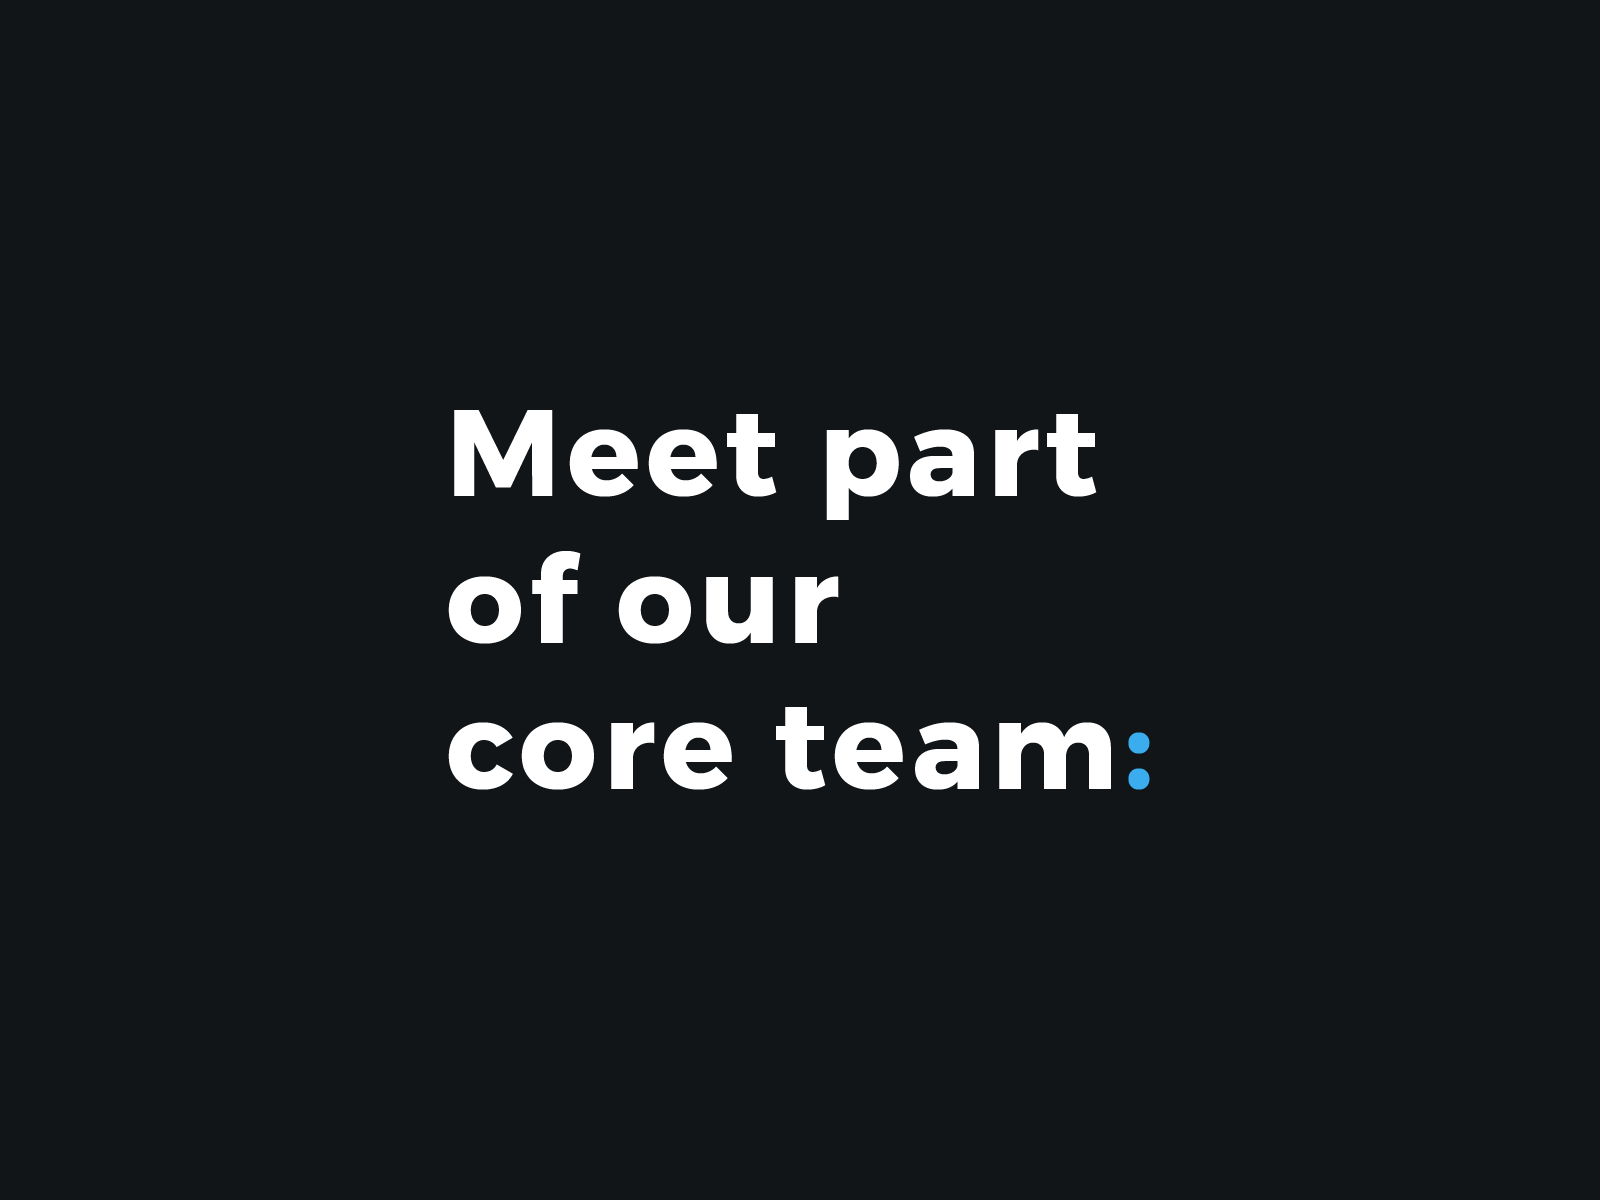 Meet part of our core team agency team animation branding branding agency collective collective ray core team creative creatives group marketing motion animation motion graphics video production weare wearecreative